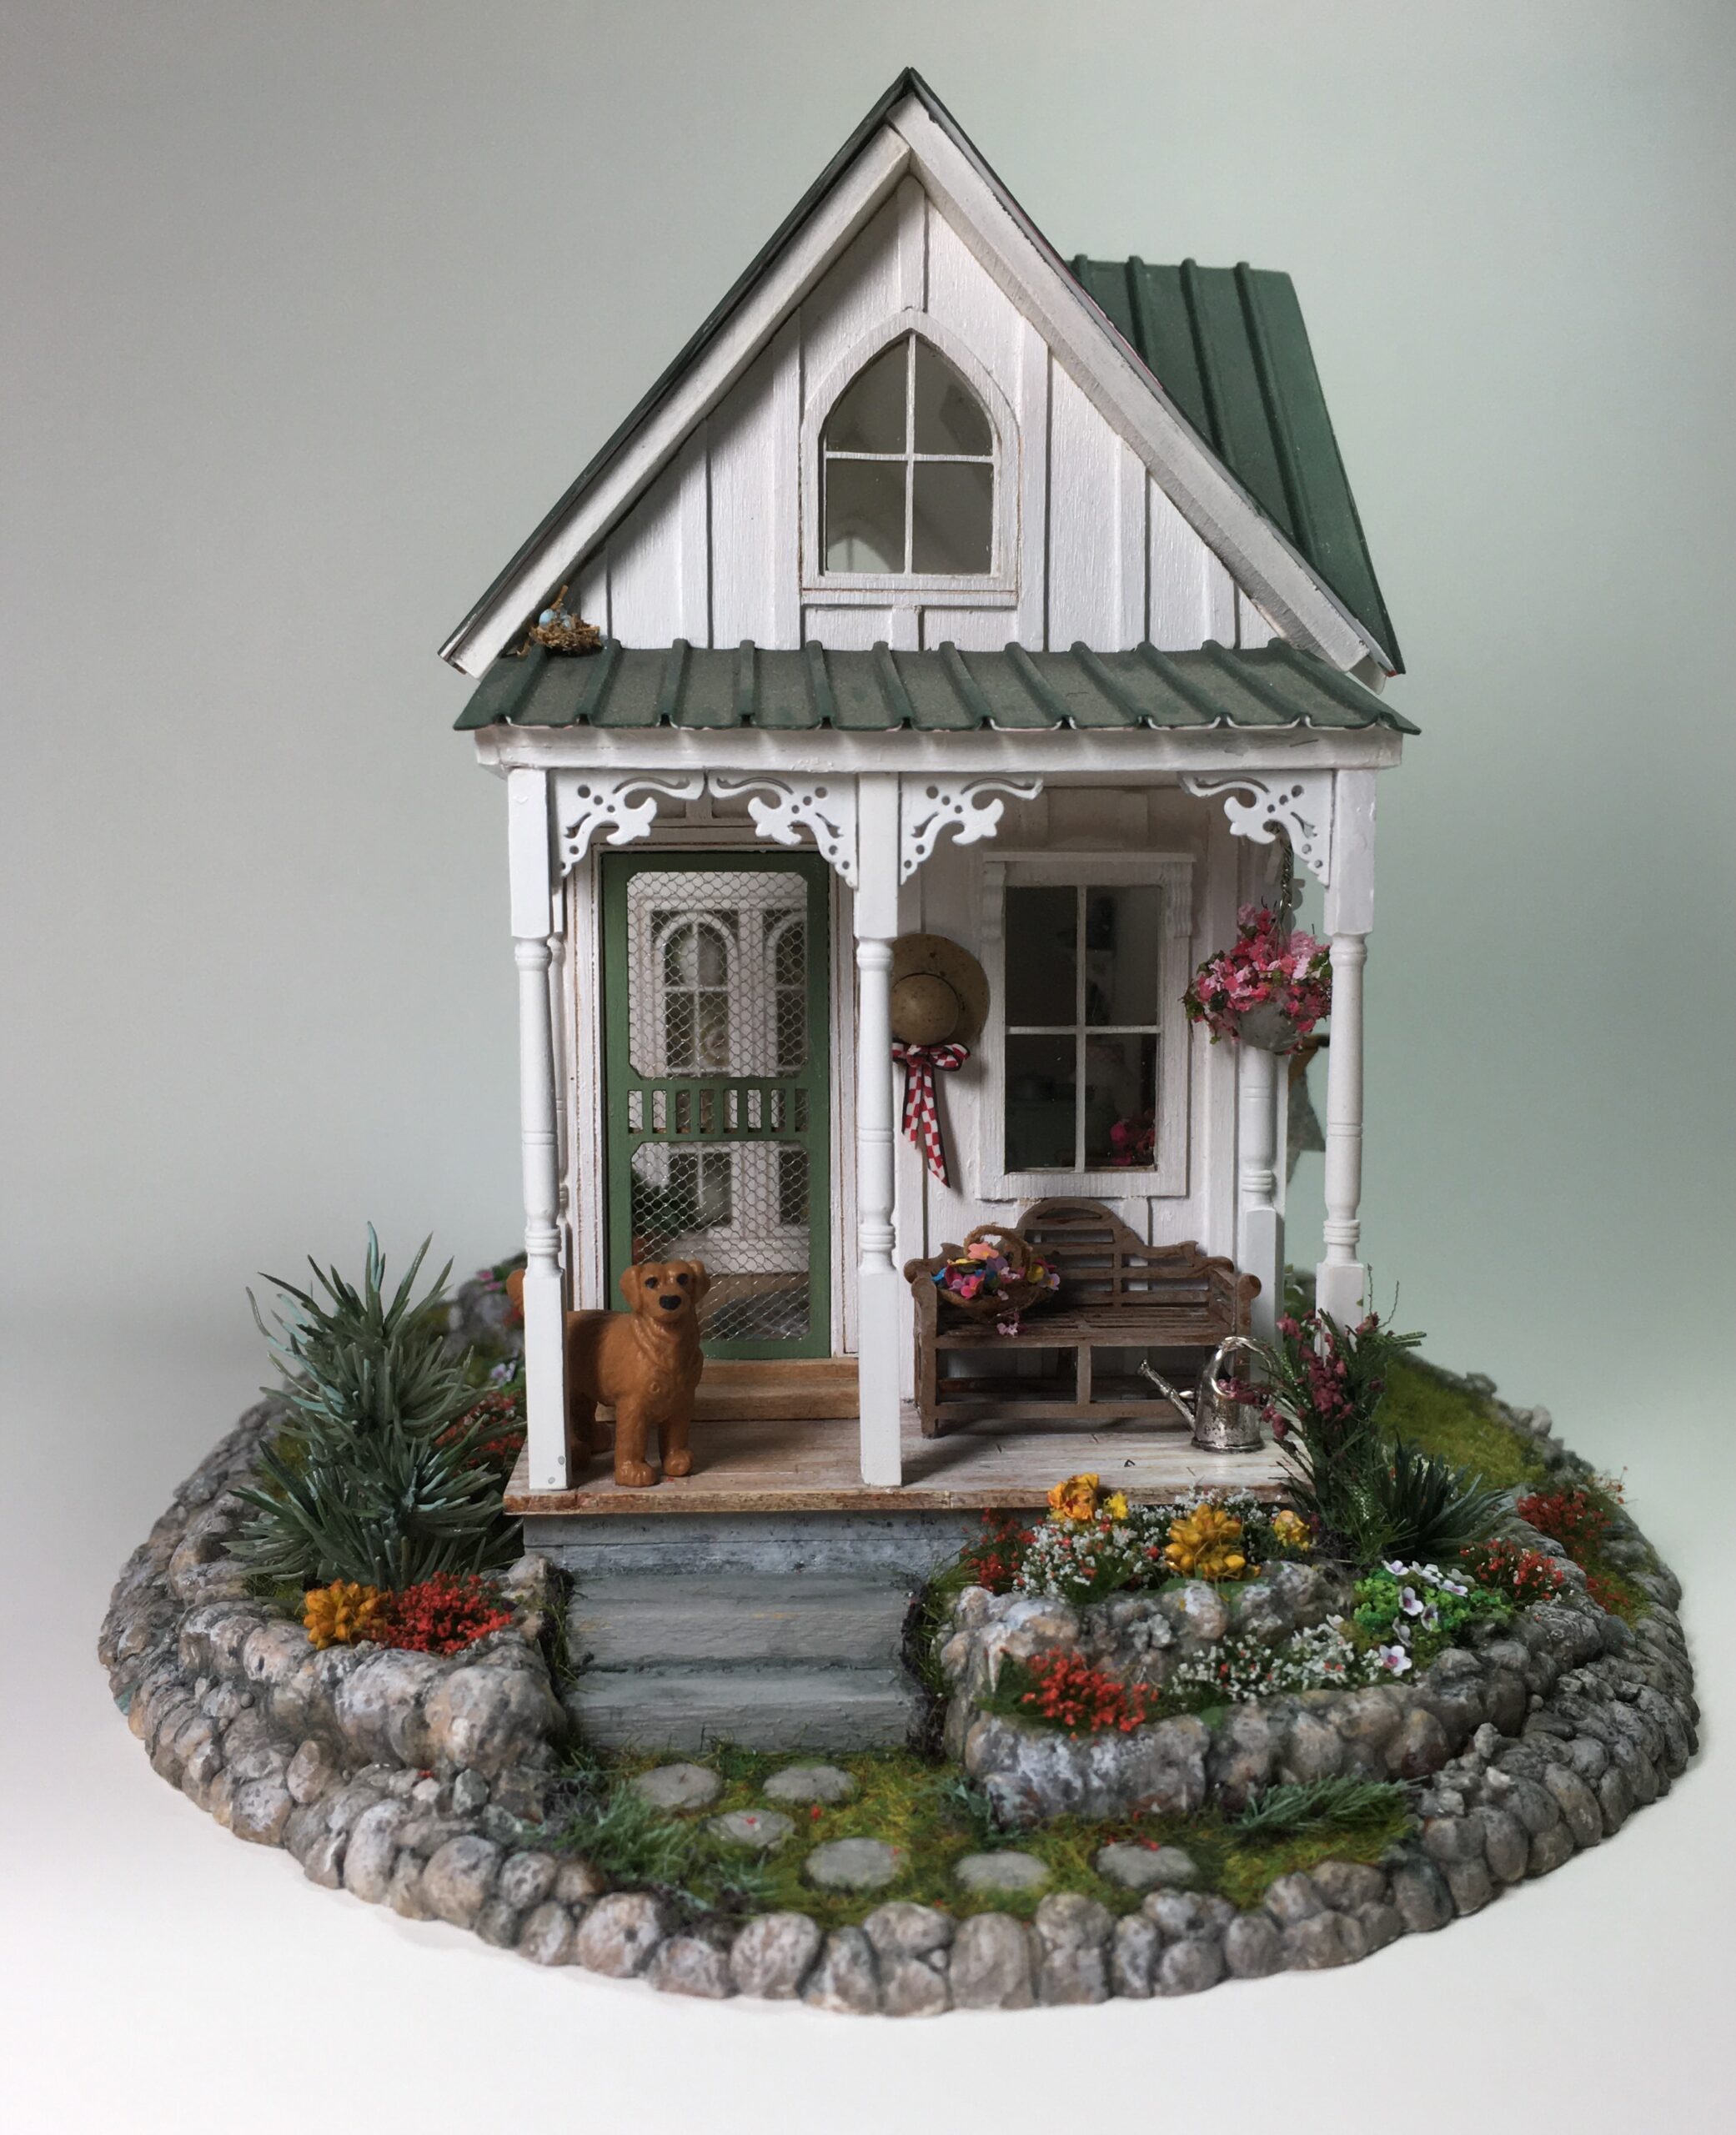 Creekside front view with base